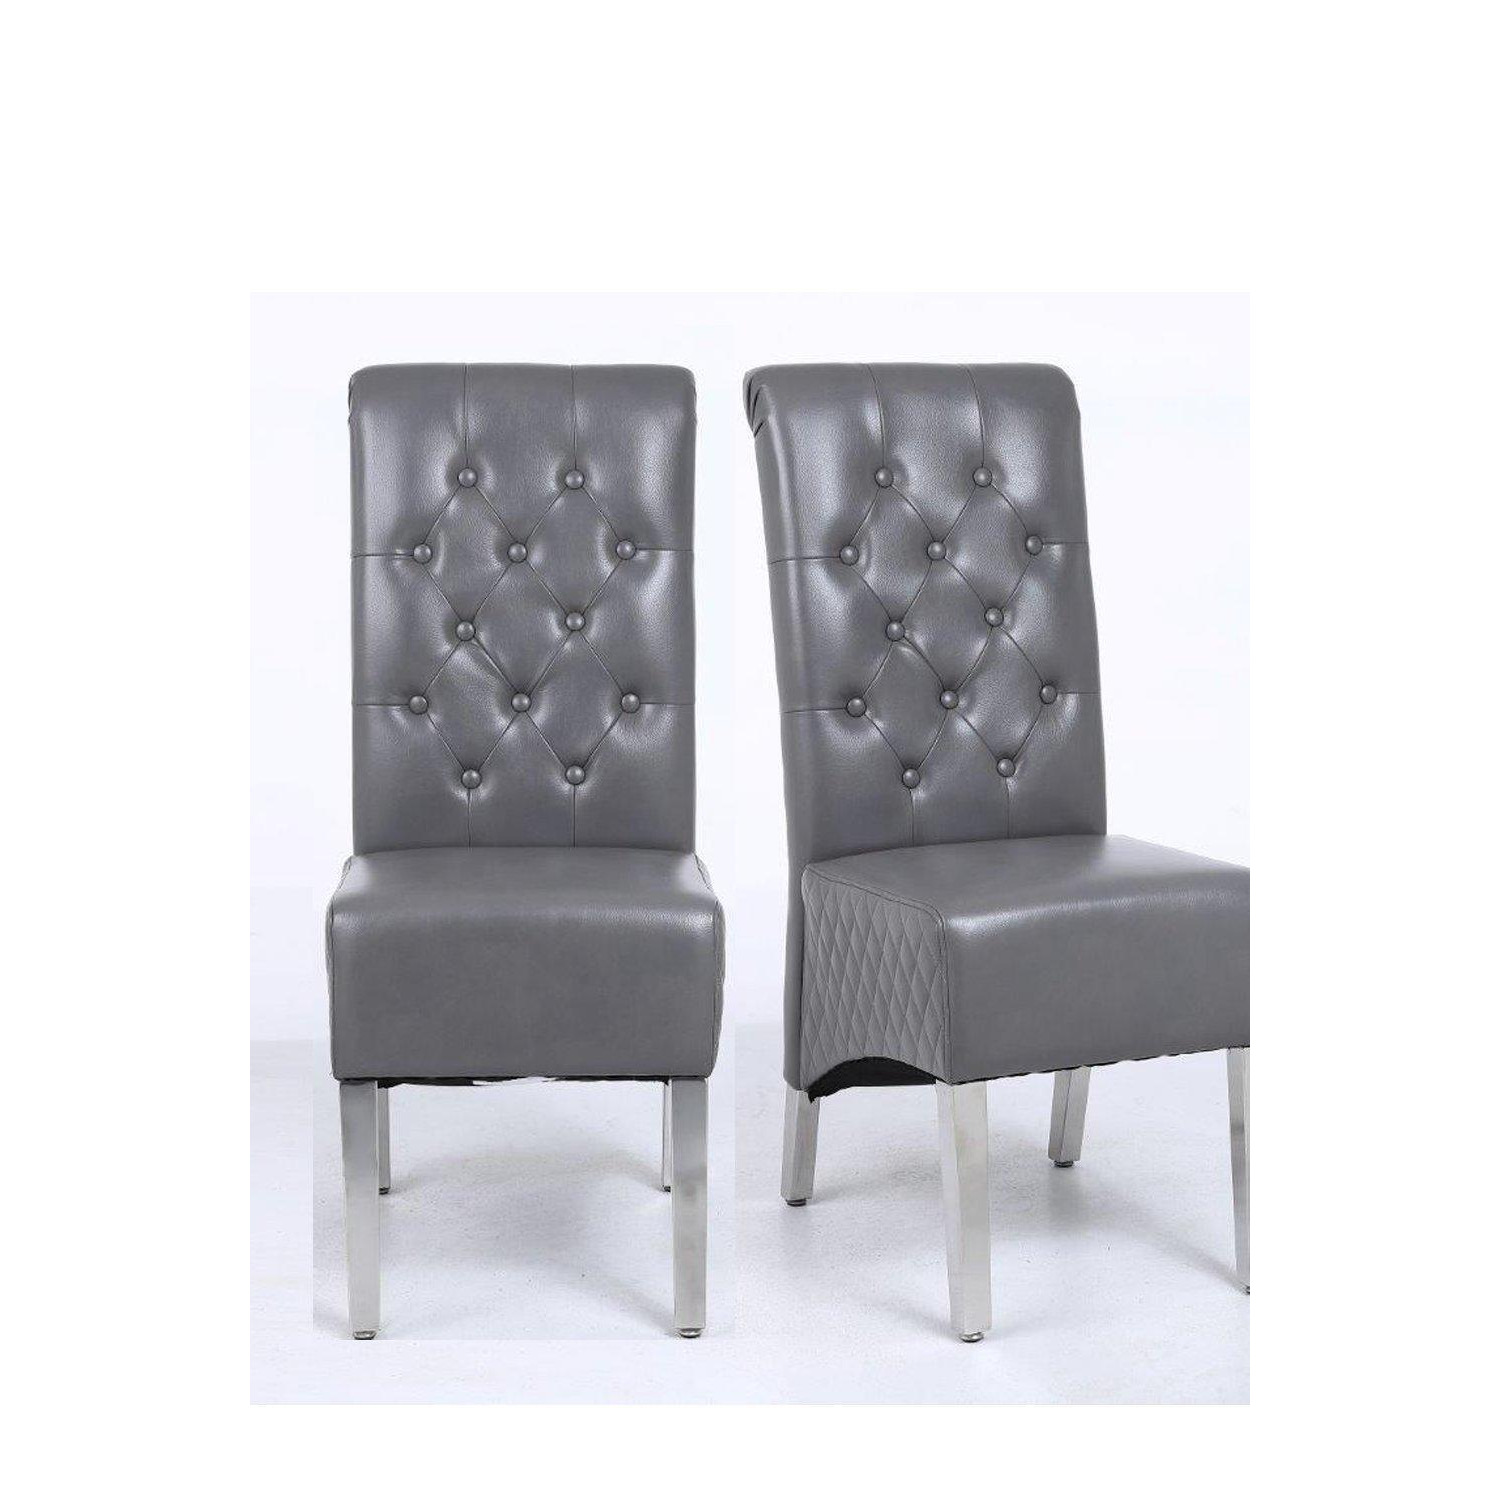 A Pair (x2) Leather Aire High Back Dining Chairs with Chrome Legs - image 1